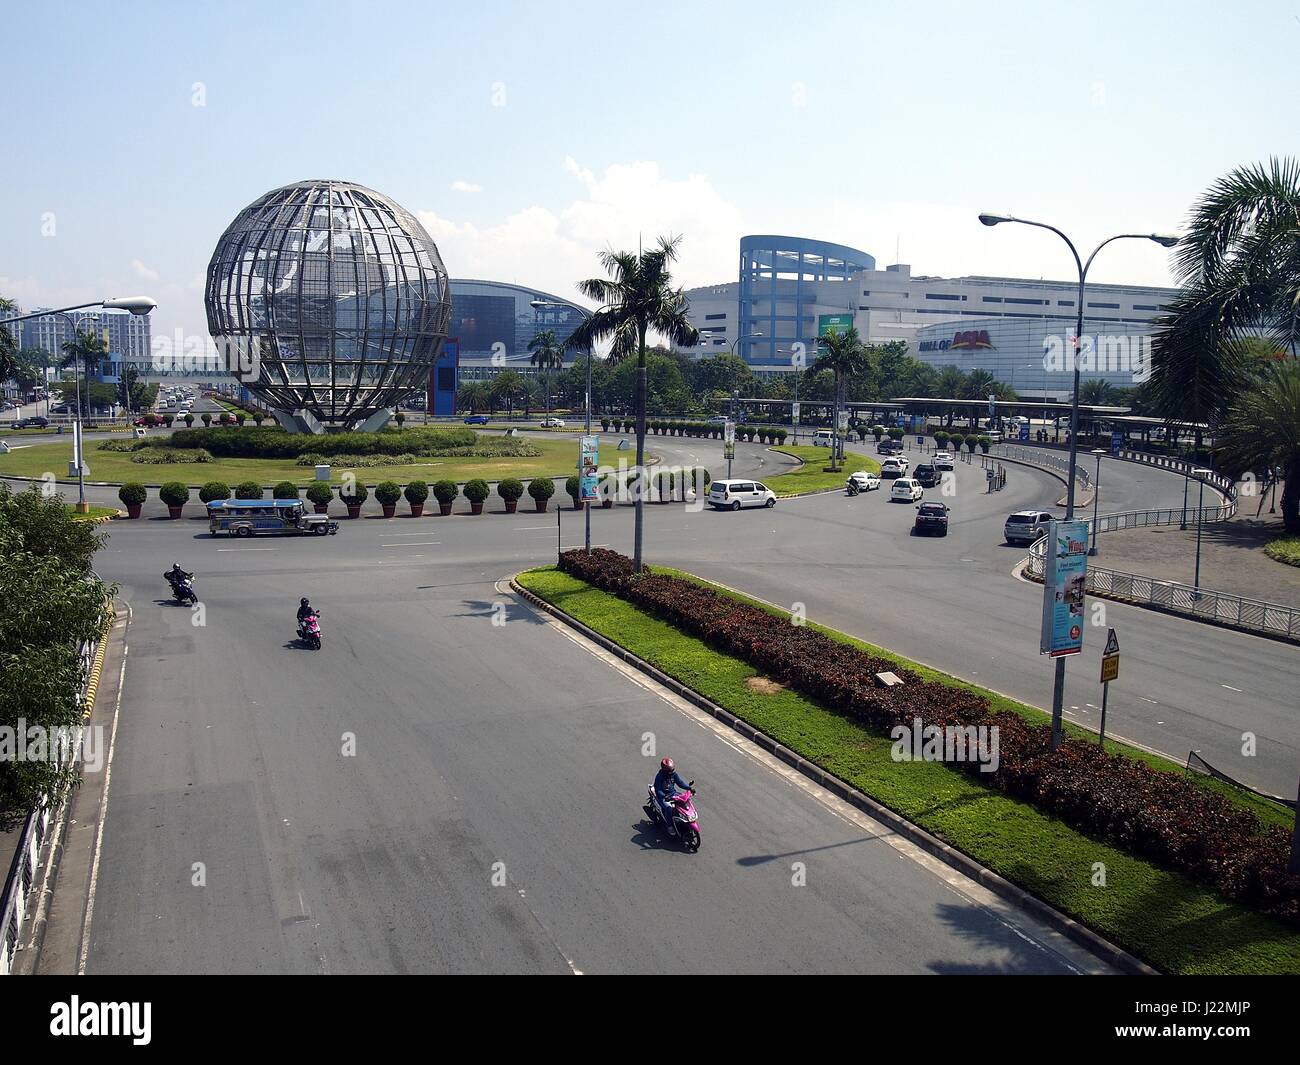 PASAY CITY, PHILIPPINES - APRIL 20, 2017: The SM Mall Of Asia or SM MOA is considered to be the third largest mall in the world. Stock Photo